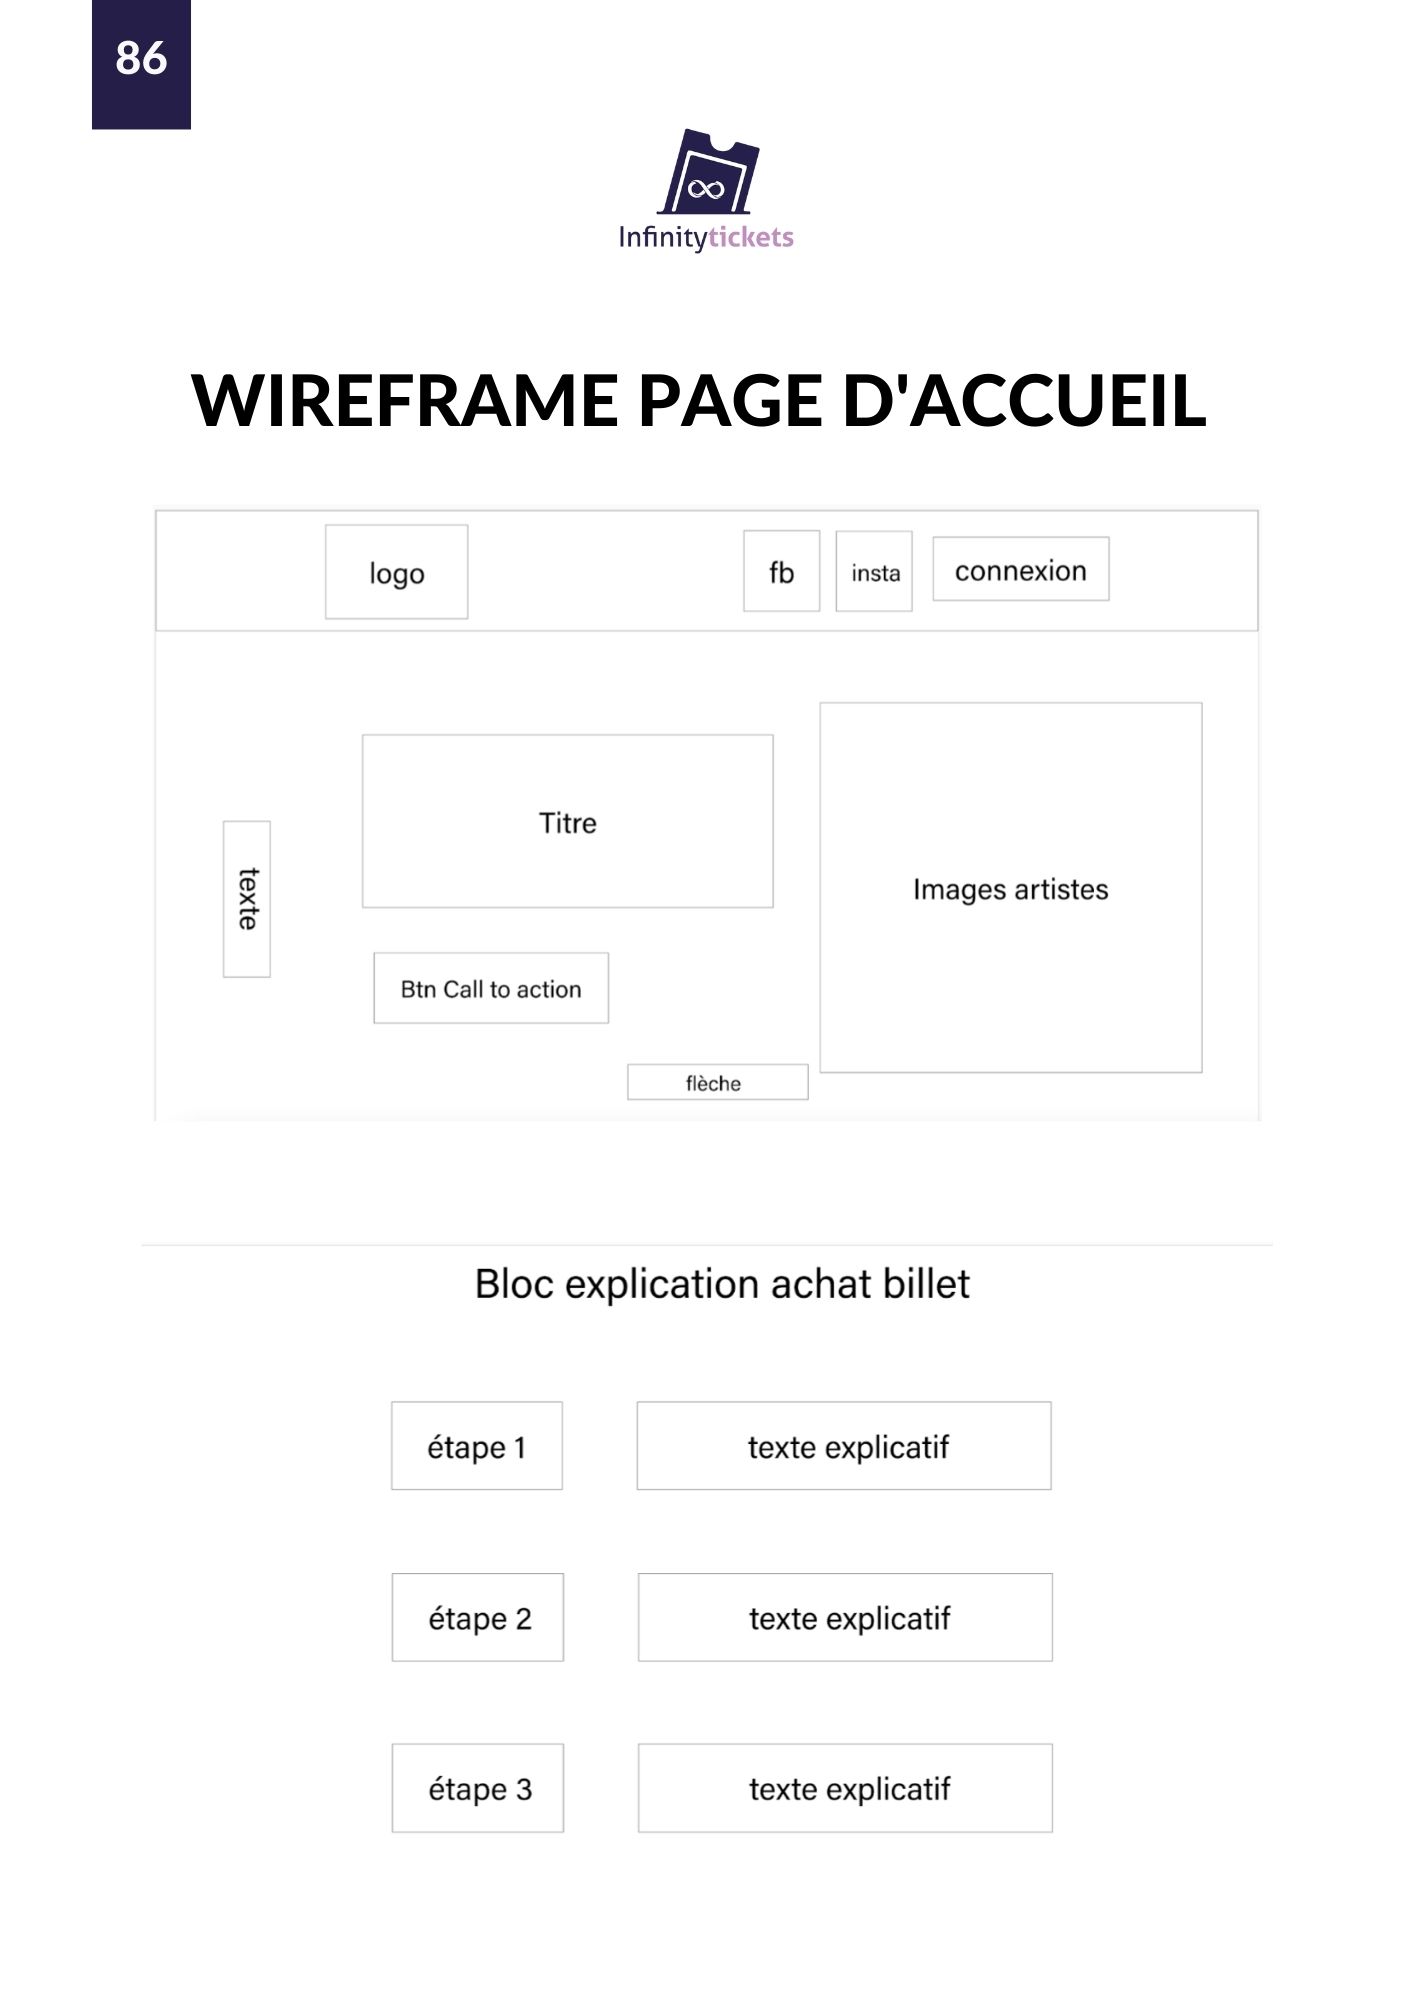 88 wireframe page d'accueil